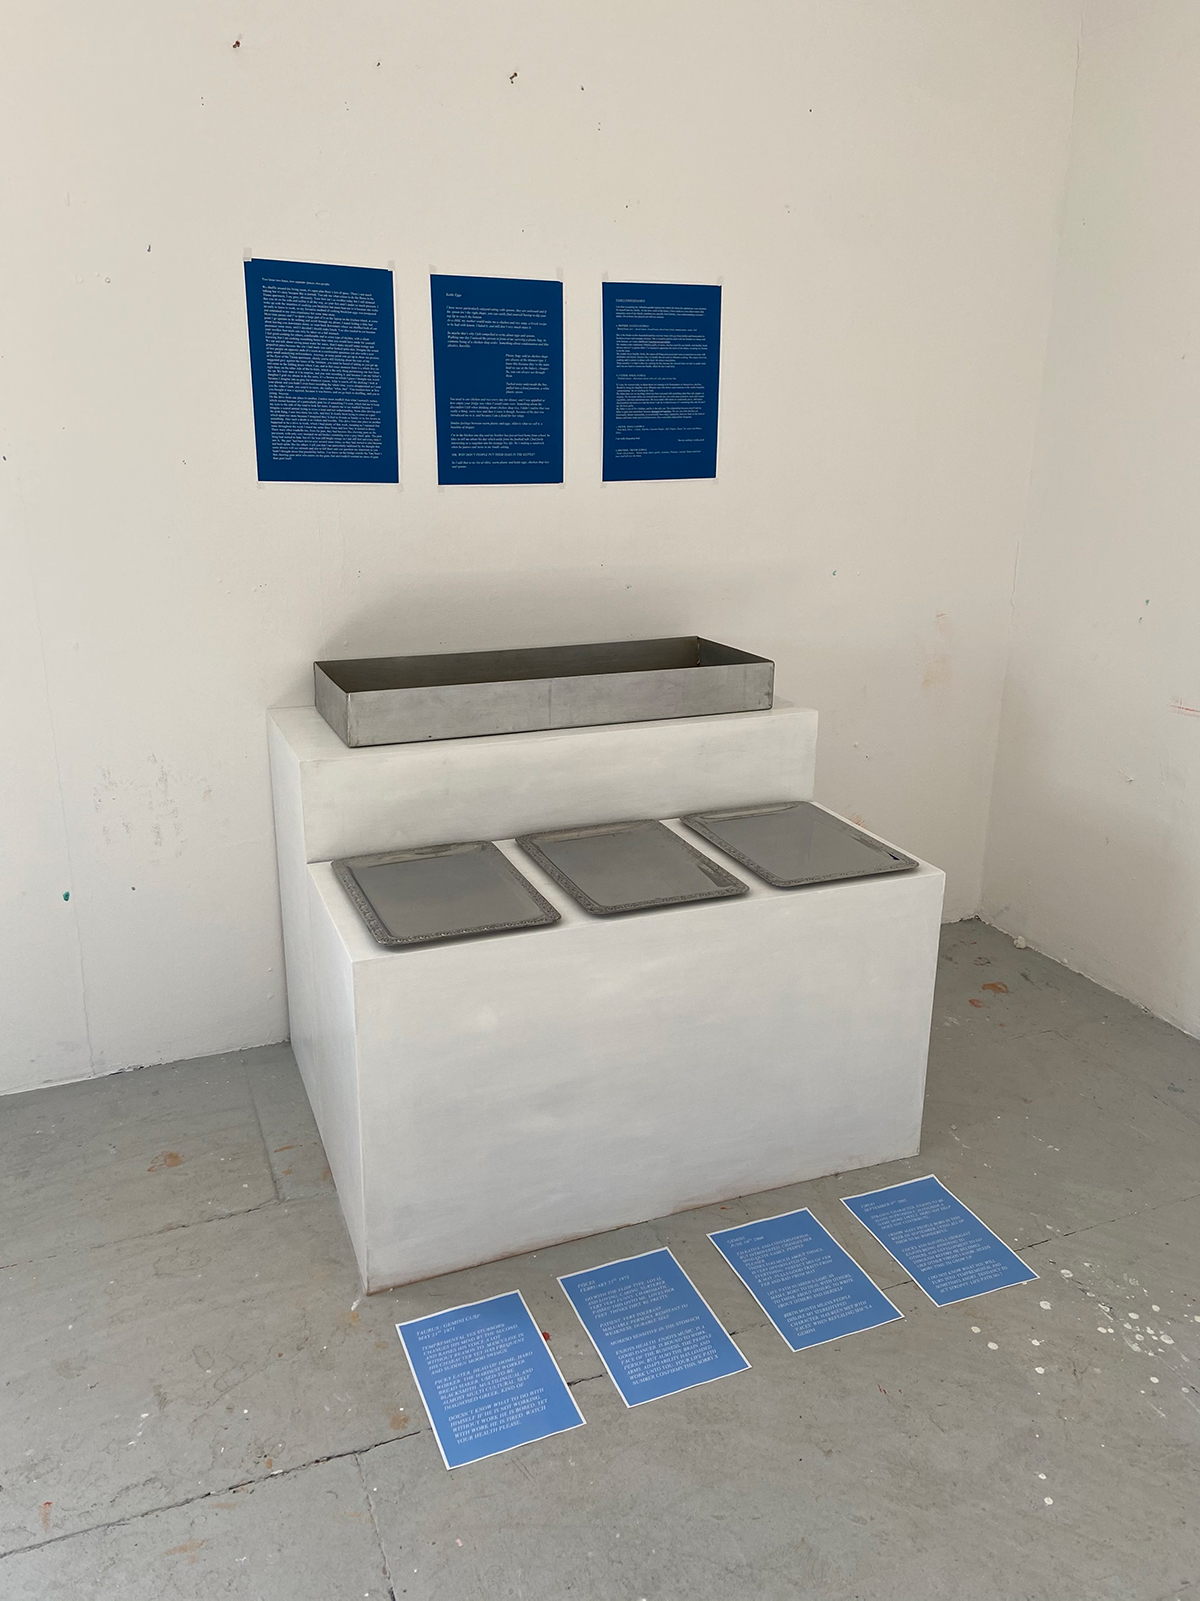 3 A3 pages of blue text hand on the wall, and 4 A4 pages of blue text lay on the floor of a room. There are 4 metal trays on a table in between them.